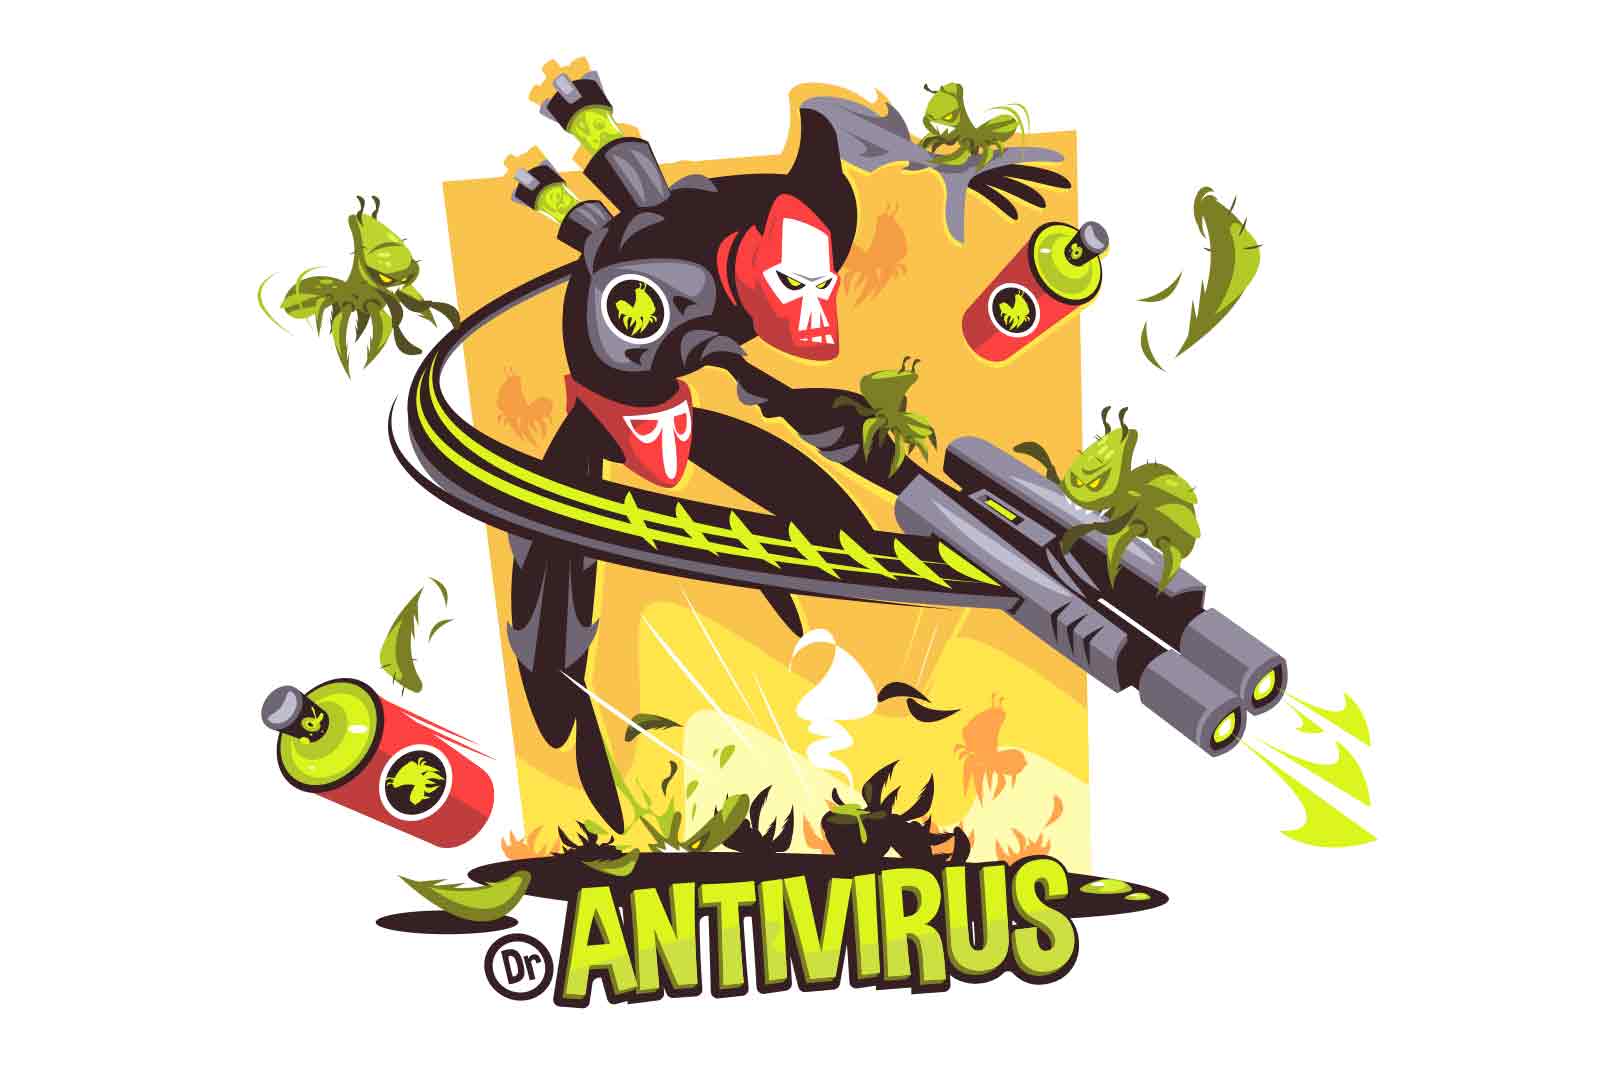 Antivirus system monster with weapon kill viruses vector illustraton. Corporate system protection, cybersecurity or internet security flat concept